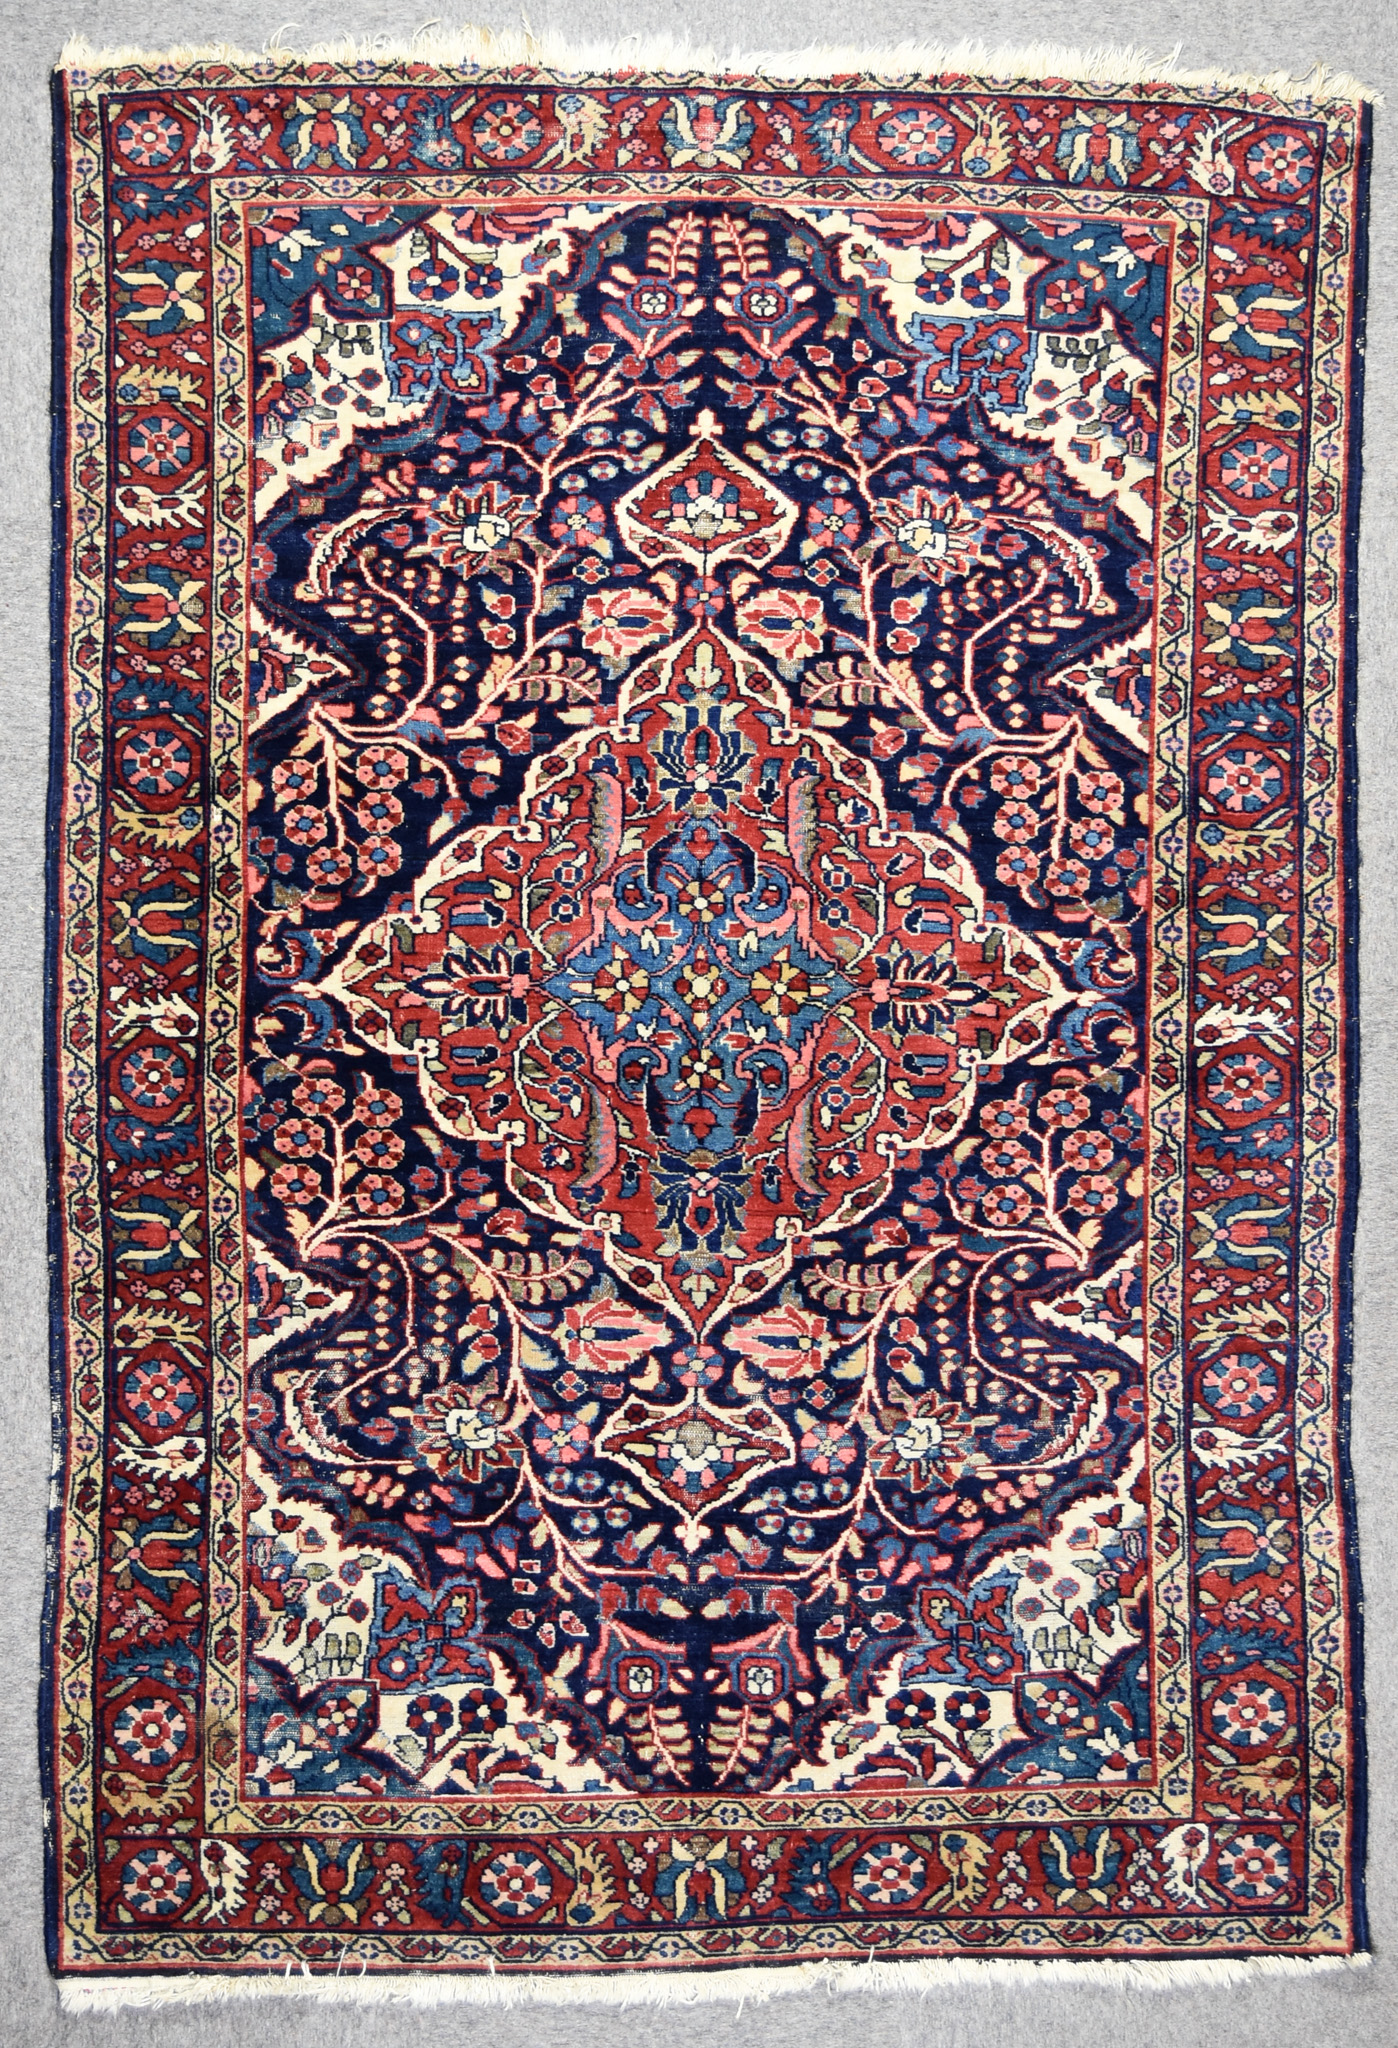 An Antique Borchaloo Rug, woven in colours of ivory, navy blue and wine, with a bold central lozenge